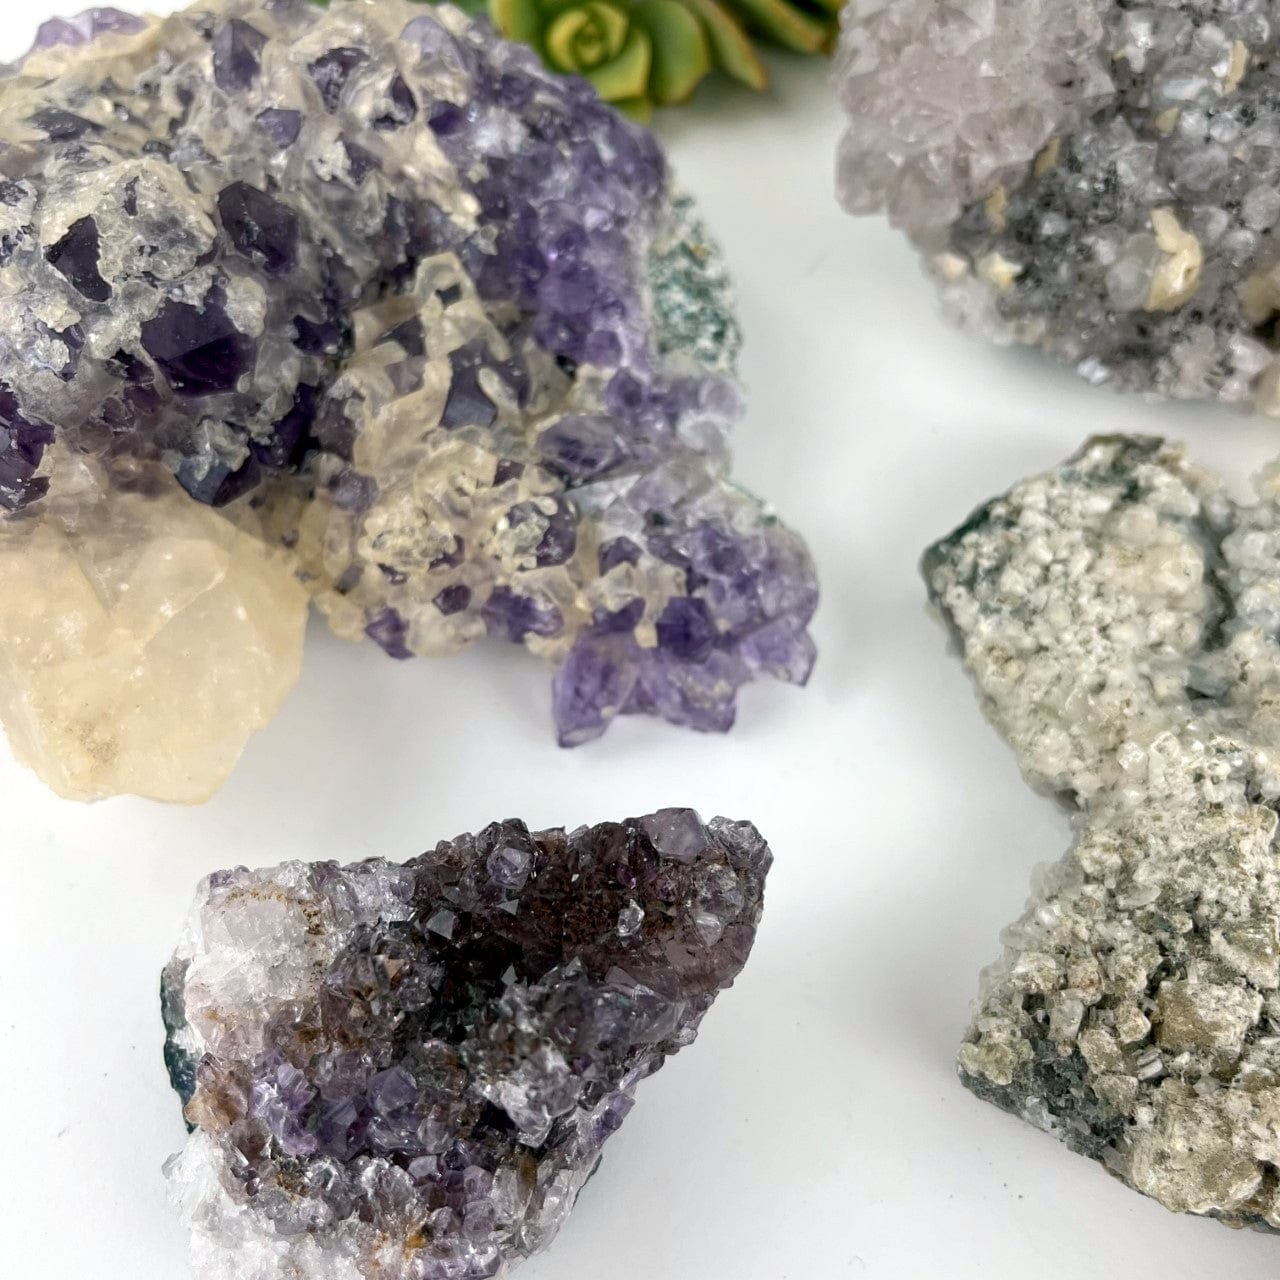 up close of the amethyst pieces